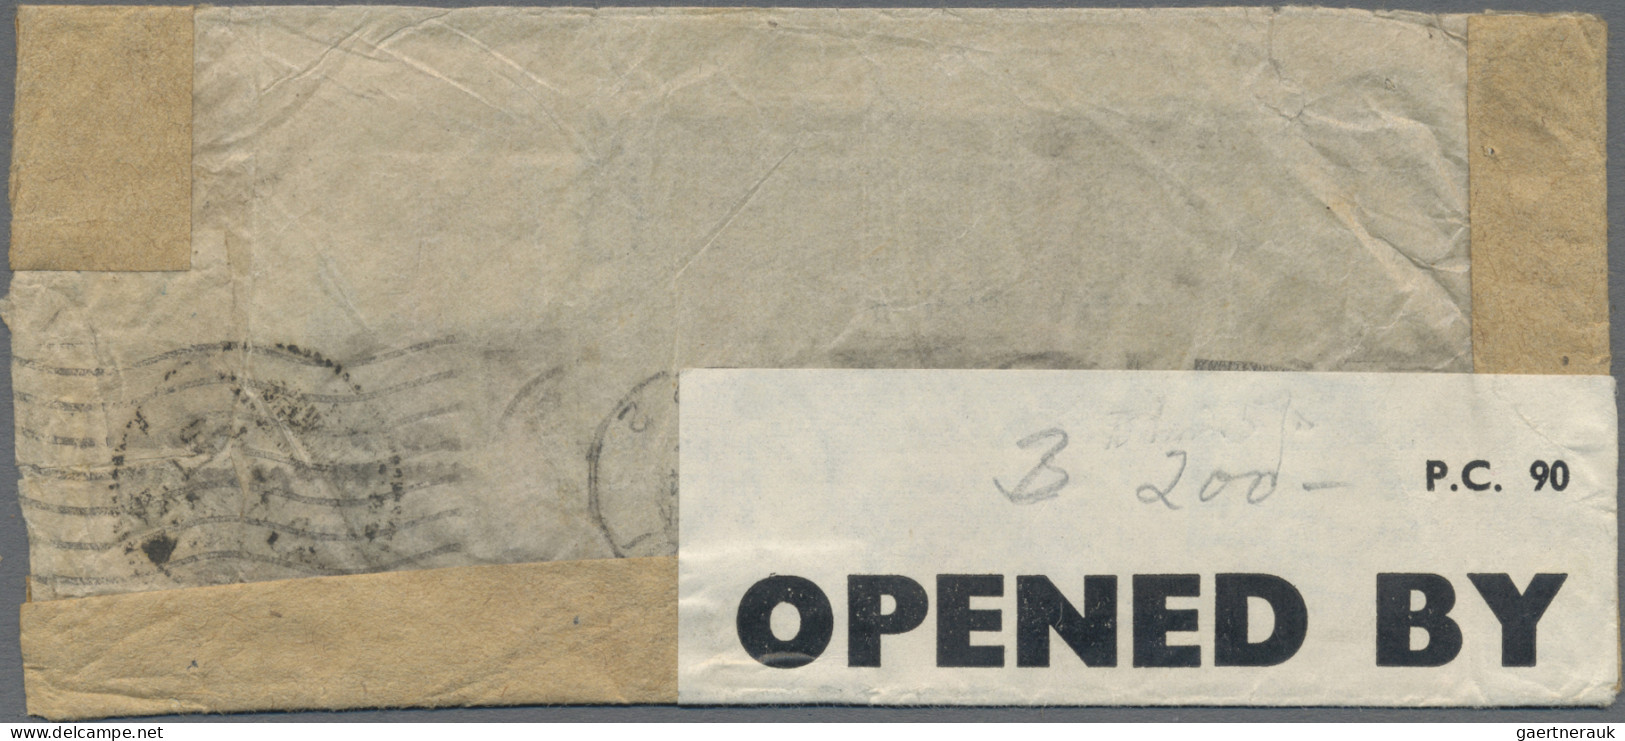 China: 1942/45, Airmail Cover Addressed To London, England Bearing SYS Central T - Covers & Documents